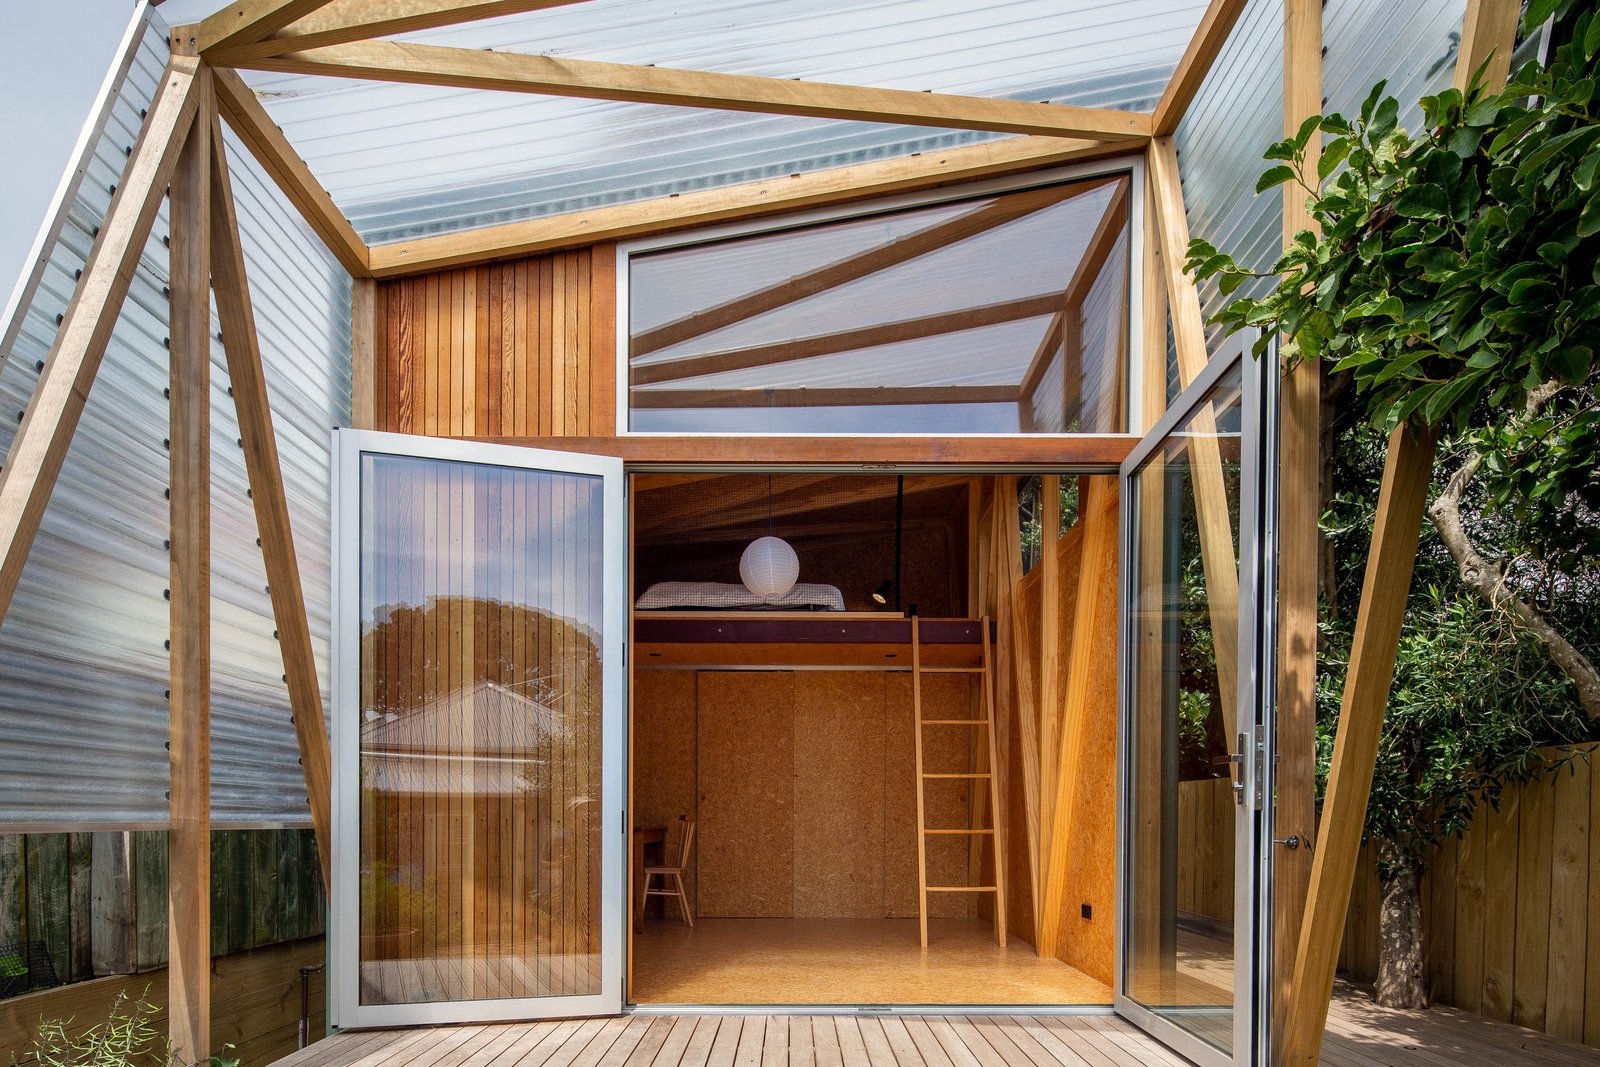 A Snug Garden Studio Makes Room for a New Zealand Family’s Growing Sons